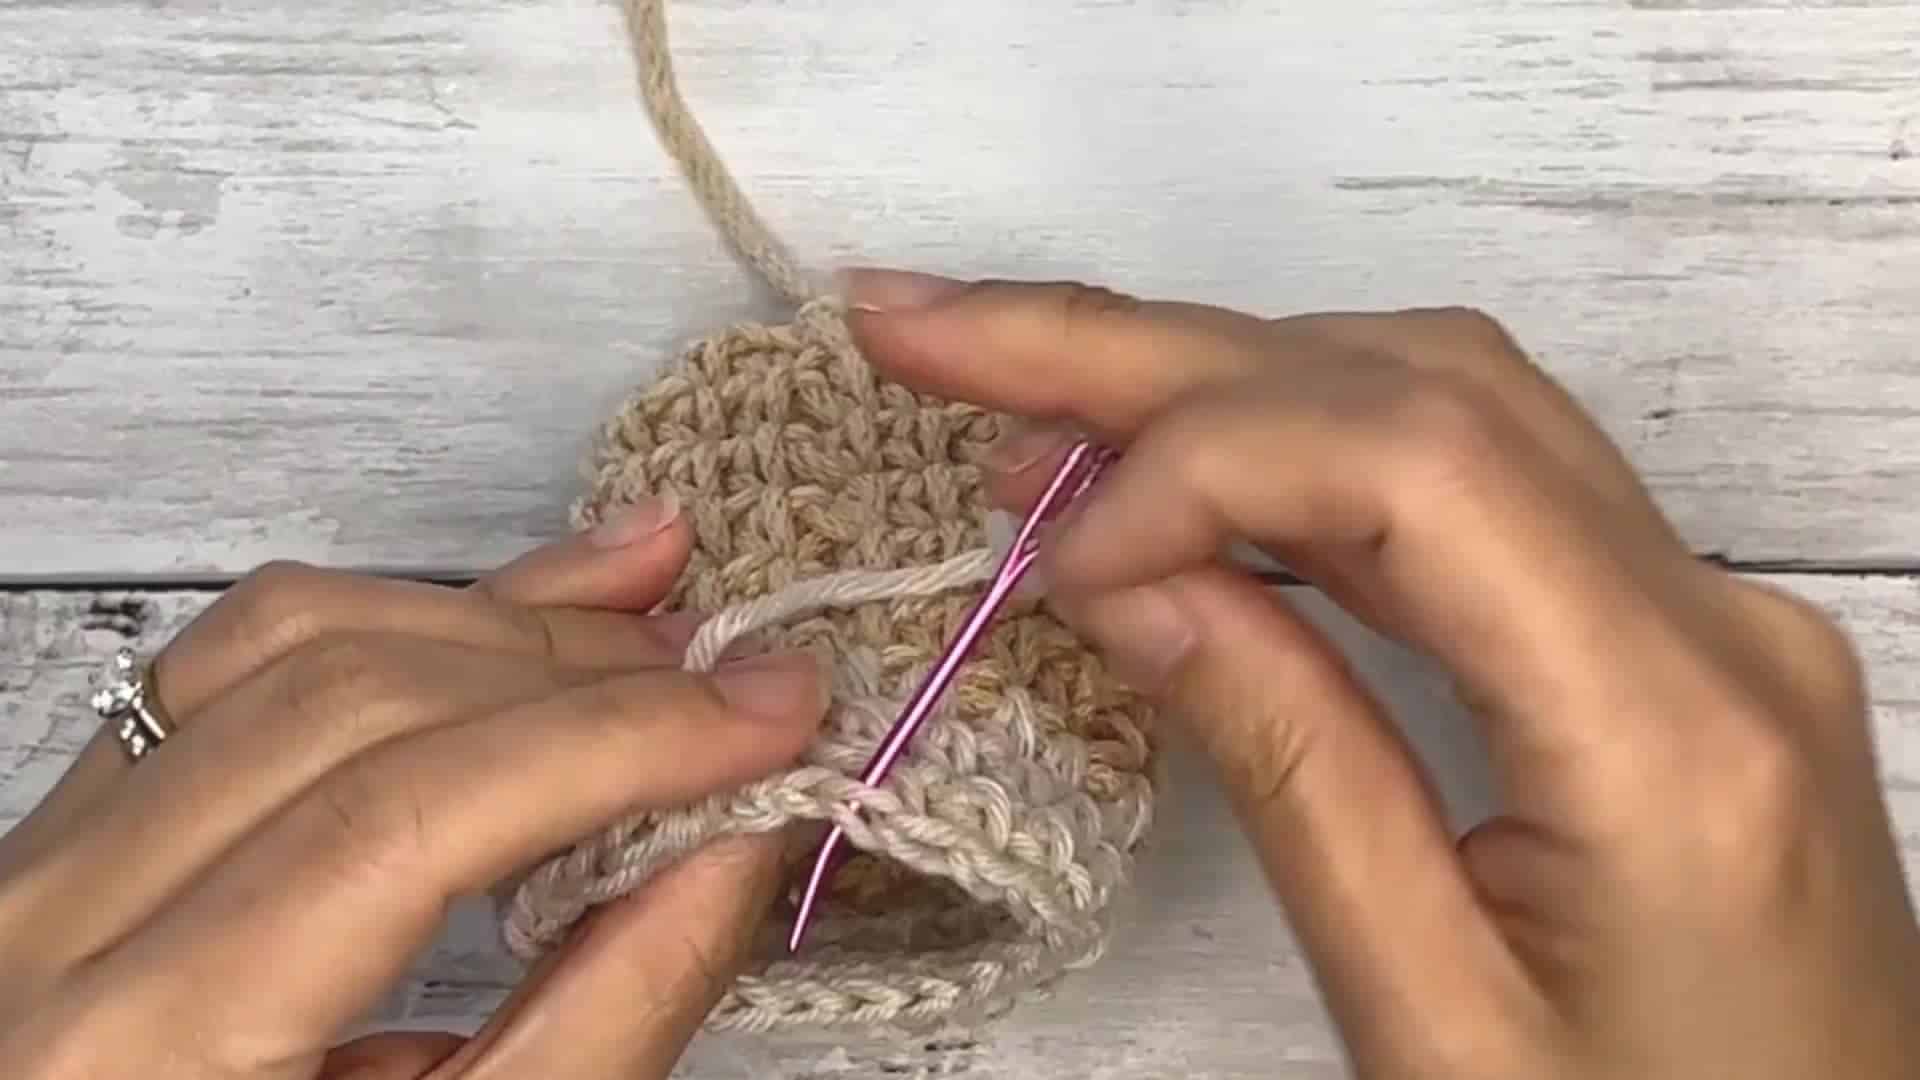 how to crochet in the round seamlessly - frame at 5m1s